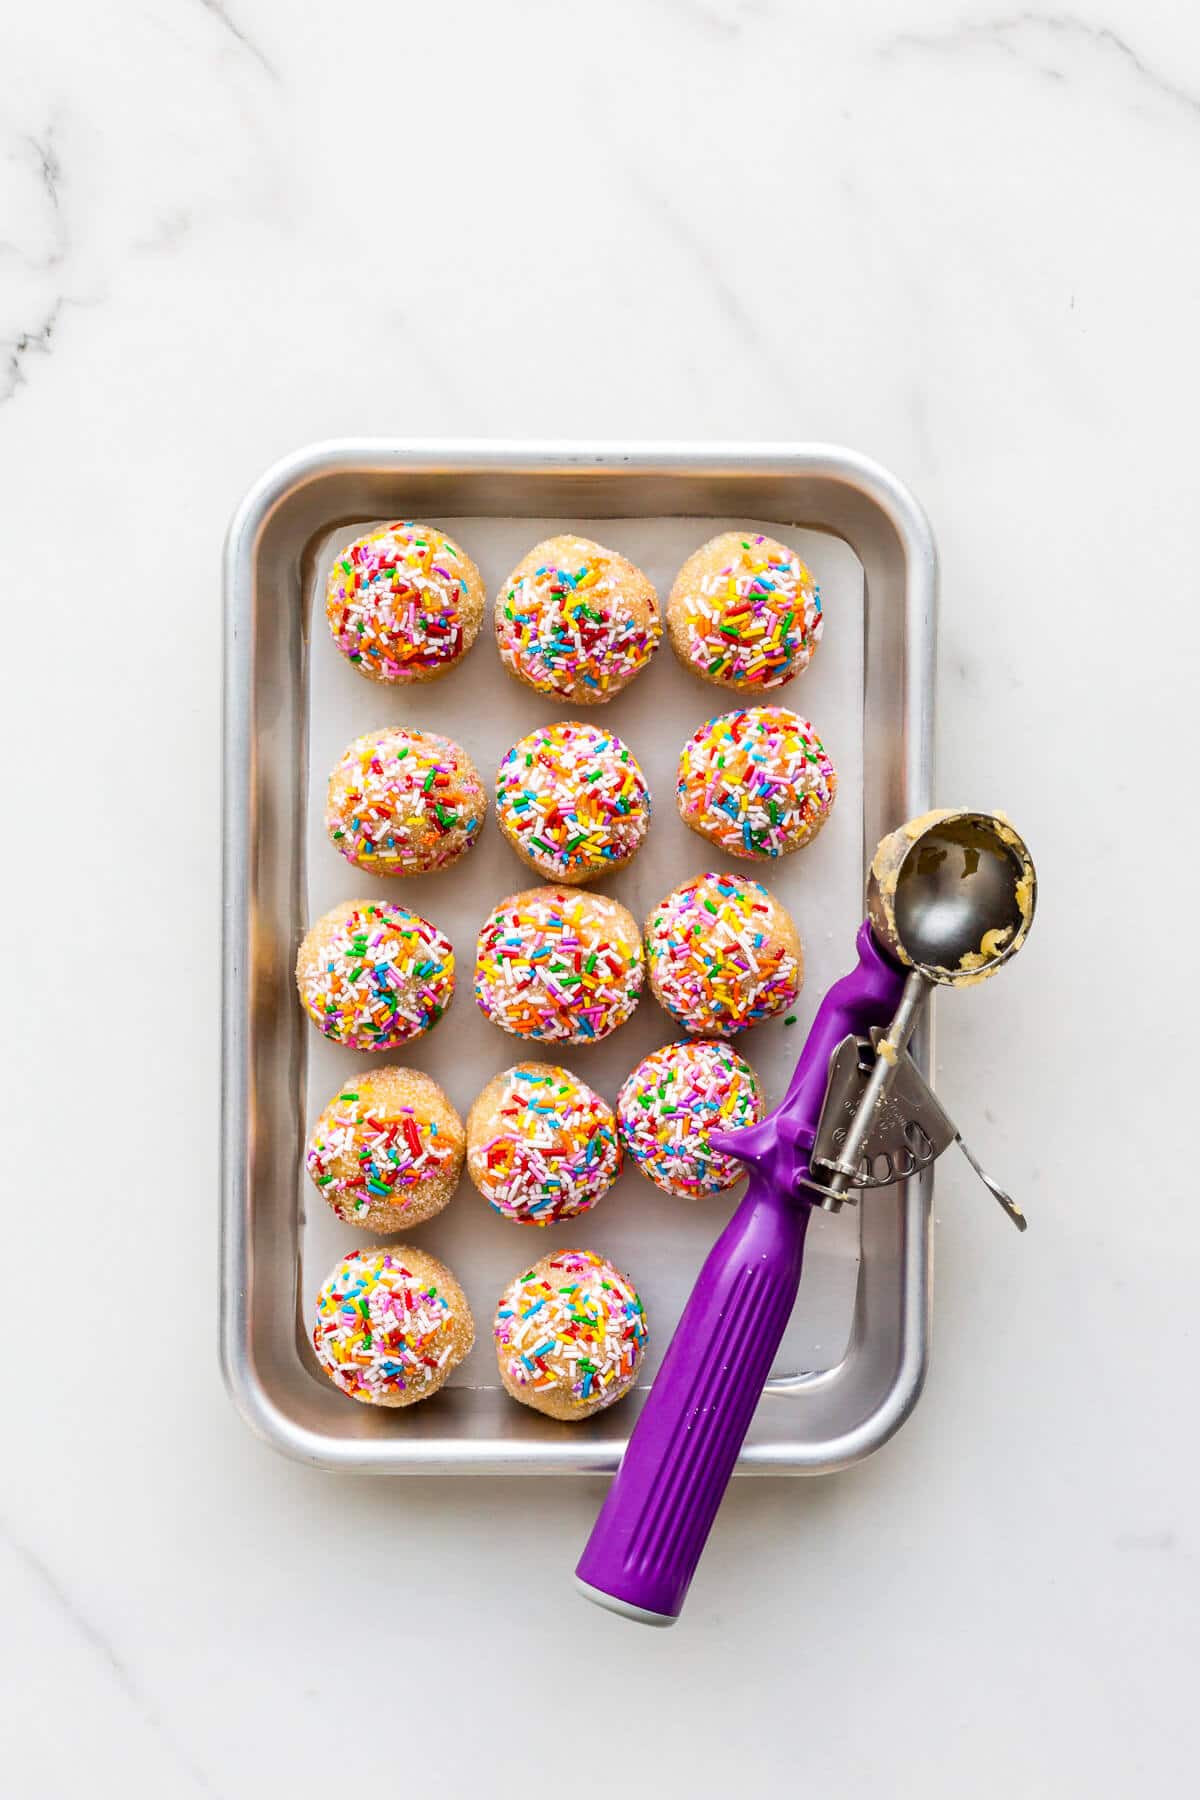 Scooped sugar cookie dough rolled in sprinkles and sugar before baking on a sheet pan.